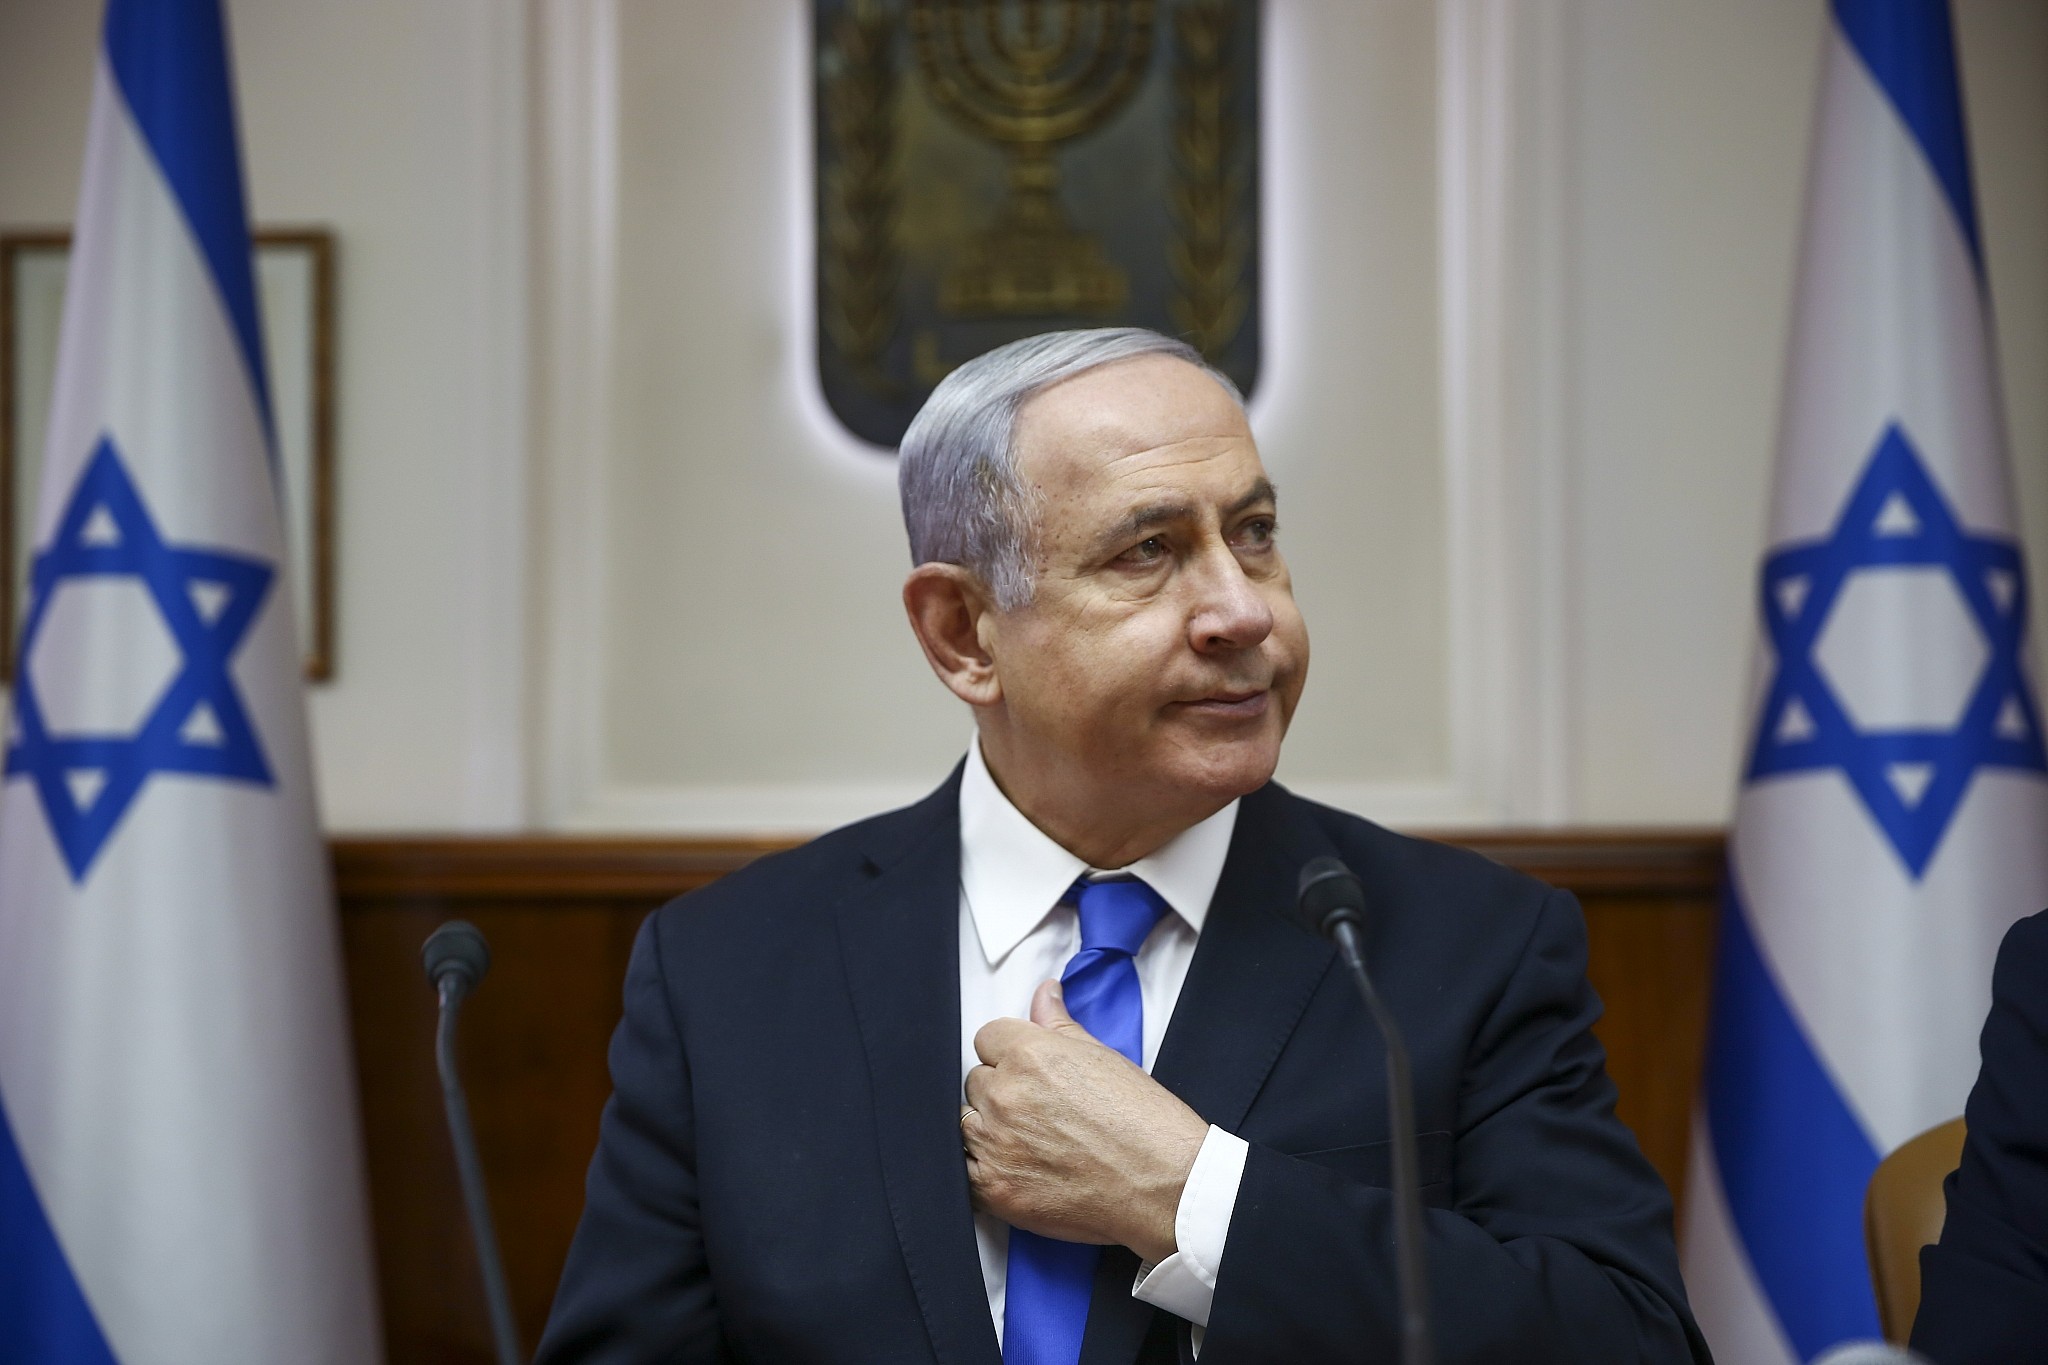 Netanyahu Brushes Off Criticism Of His Response To Gaza Violence